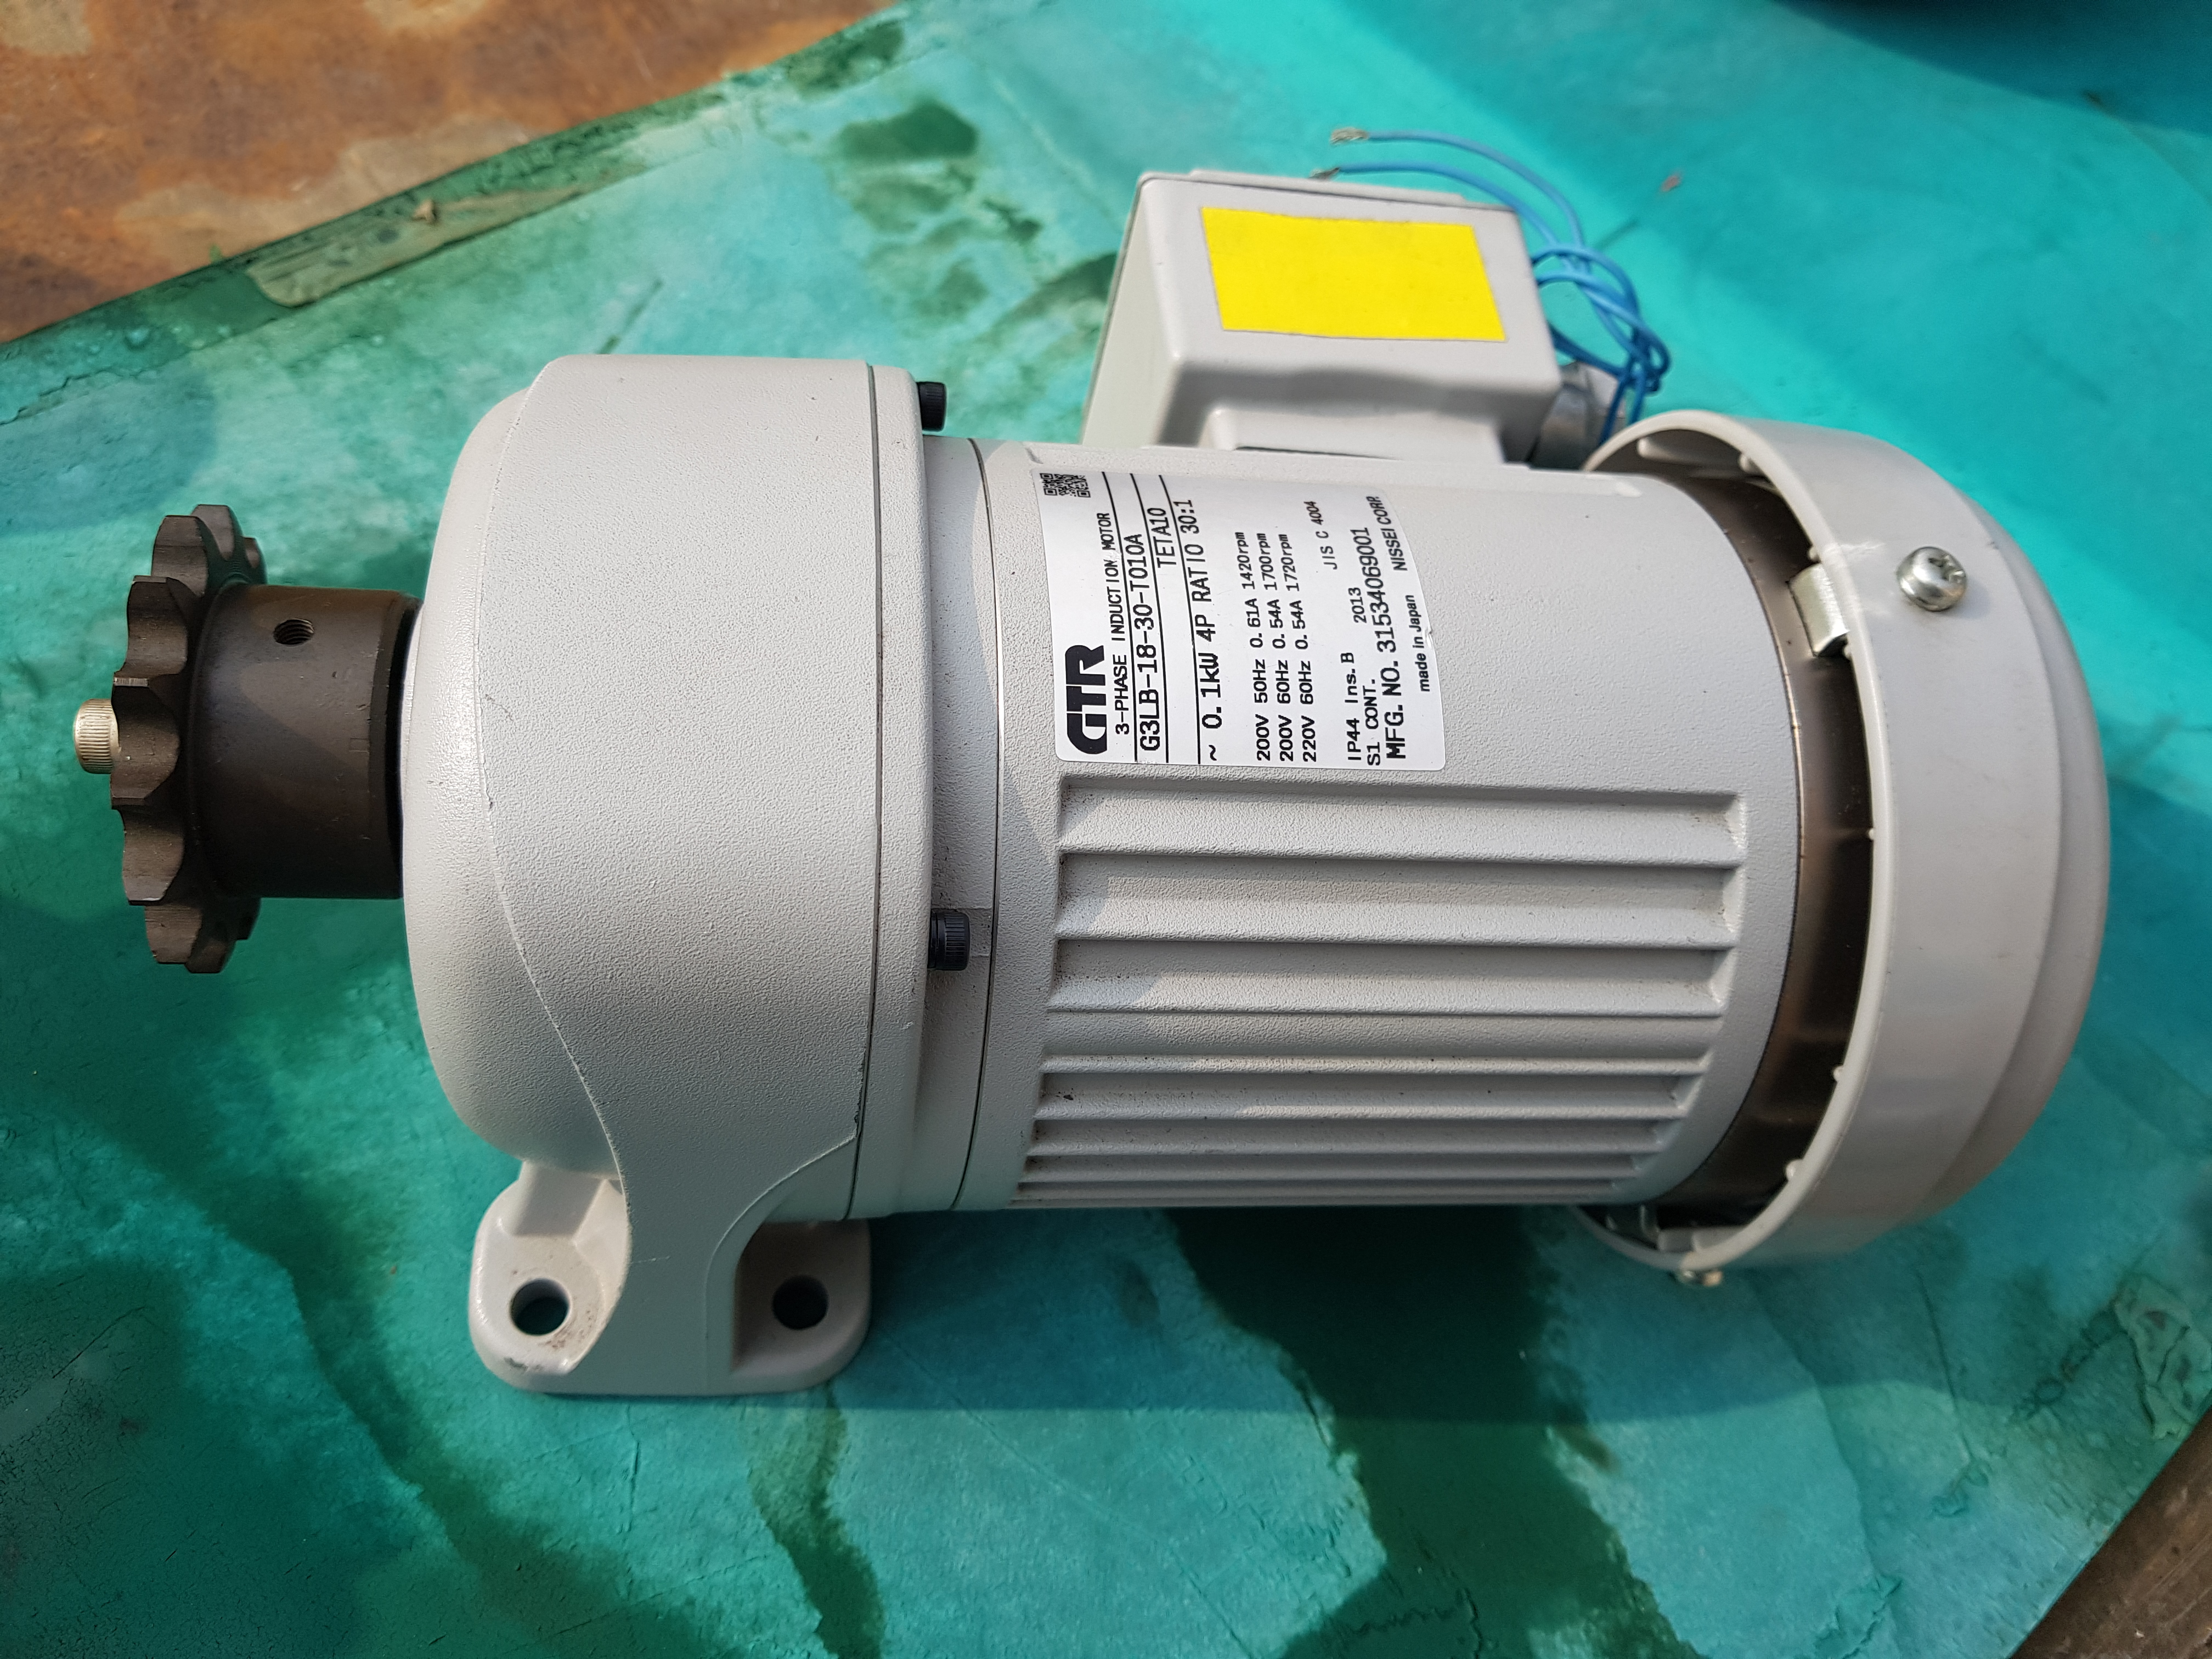 3-PHASE INDUCTION MOTOR G3LB-18-30-T010A(중고)